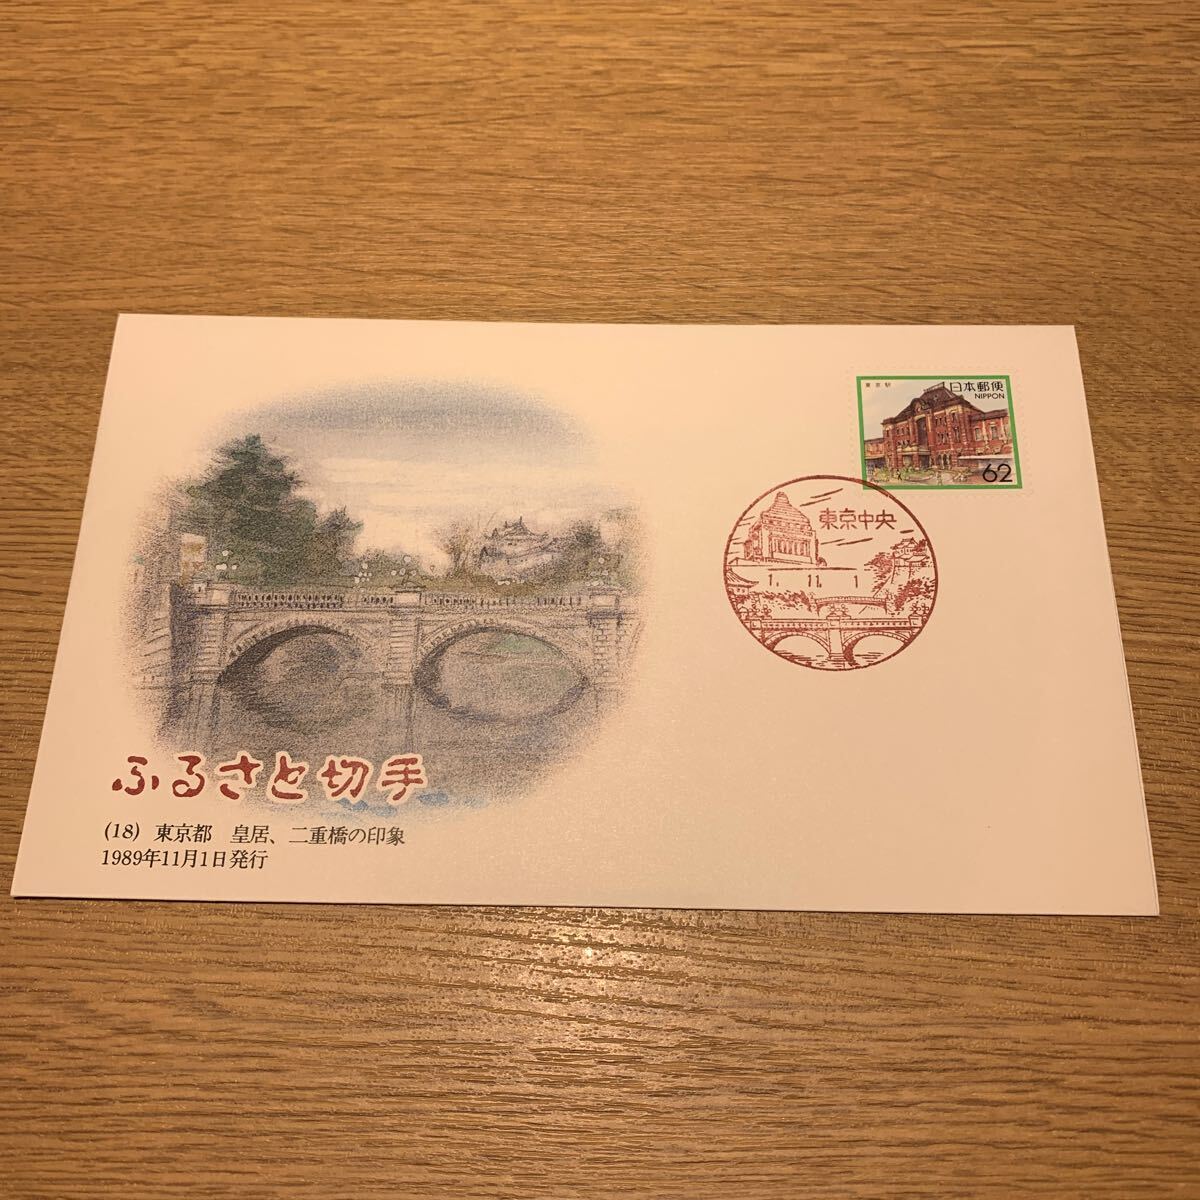  First Day Cover Furusato Stamp (18) Tokyo Metropolitan area .., two -ply .. impression 1989 year 11 month 1 day issue 